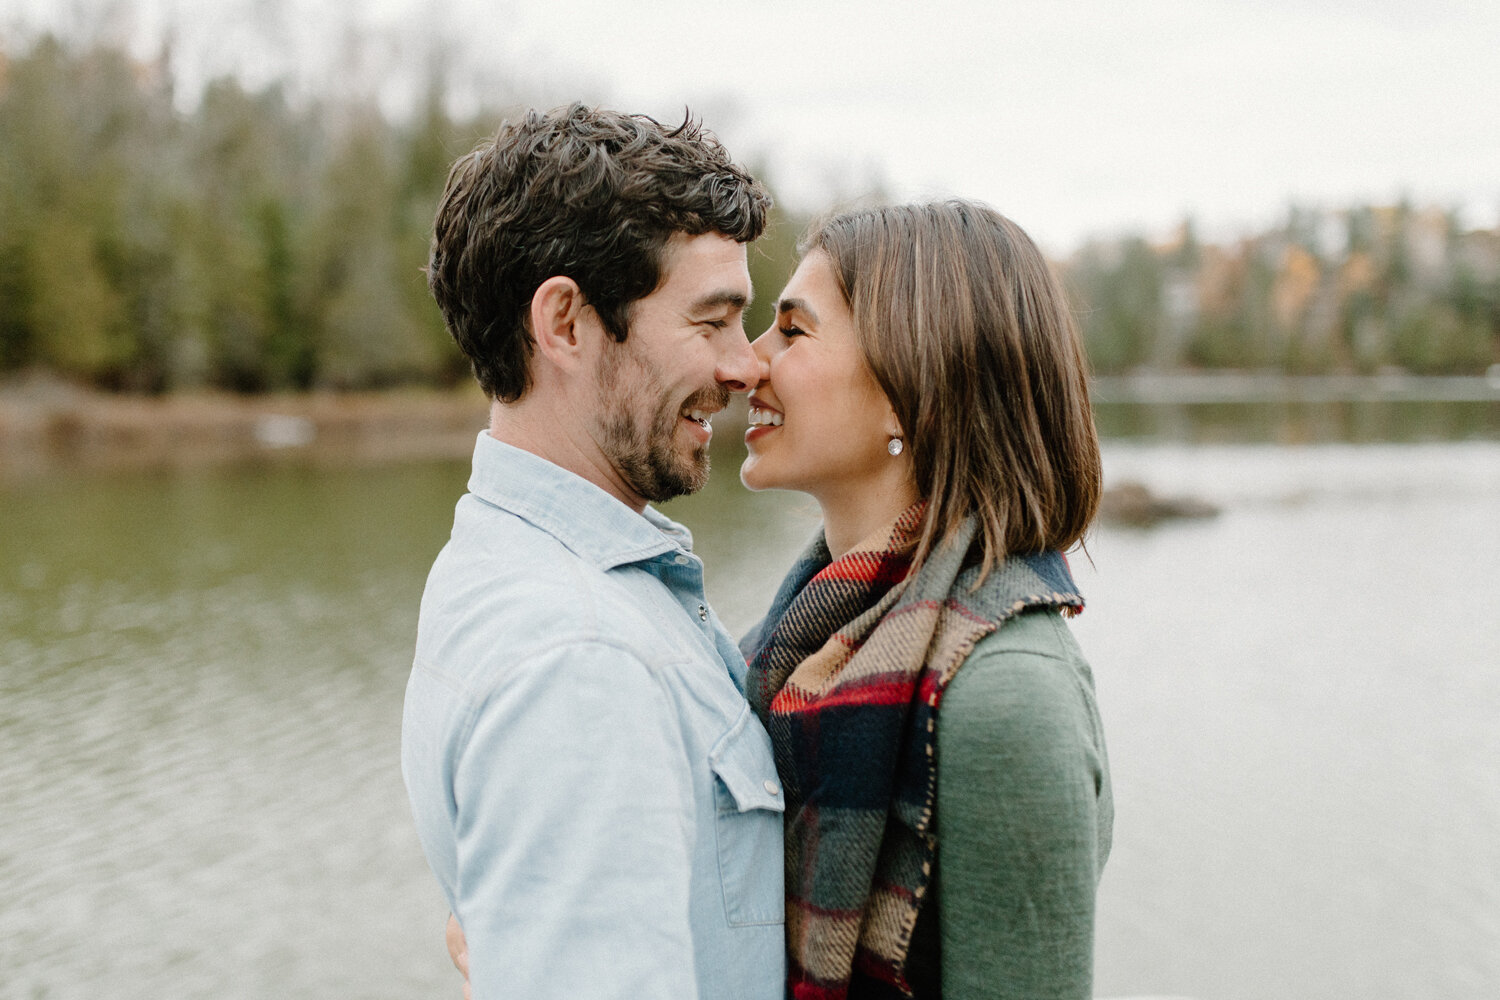  Smiling and leaning in for a kiss, Chelsea Mason Photography captures this engaged couple during their autumn couples photoshoot in Quebec, Canada. Autumn quebec canada engagement session photographer ottawa canada, casual autumn engagement outfit i